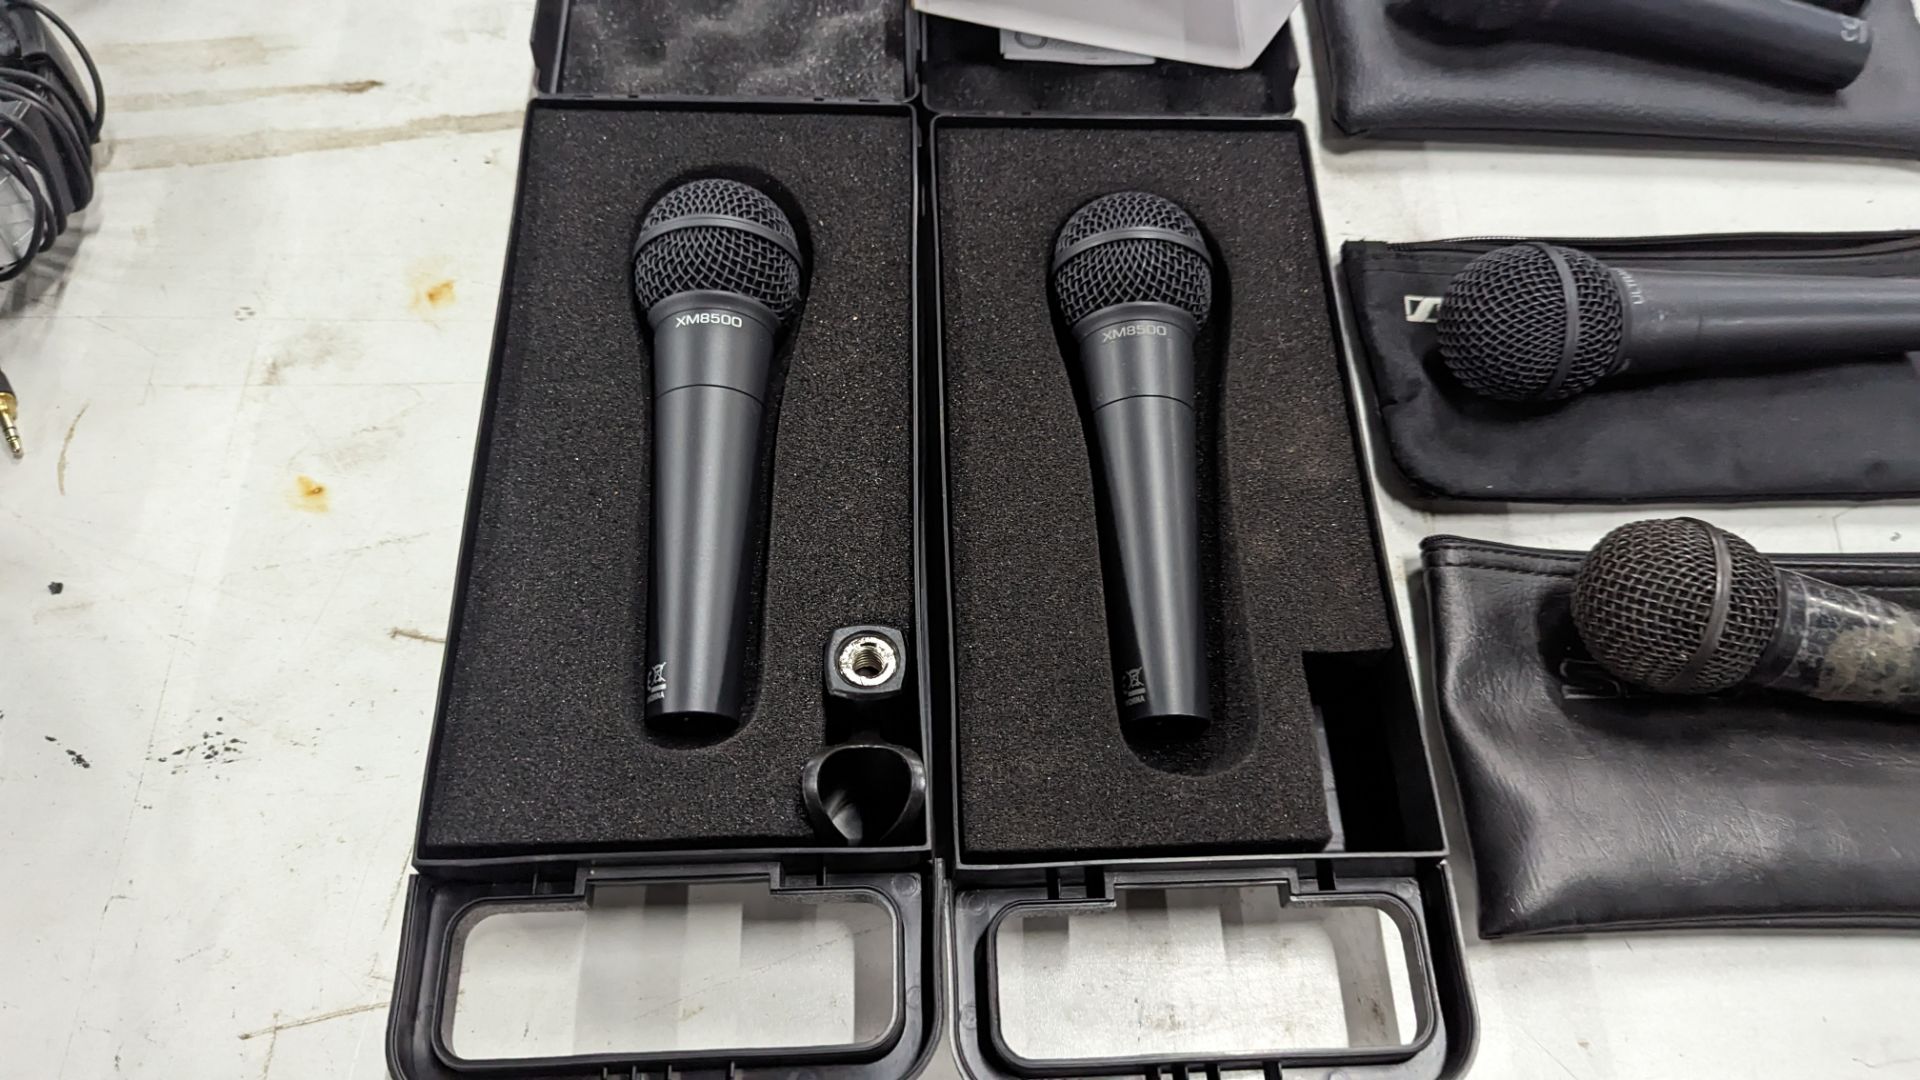 7 off Behringer Ultravoice XM8500 Dynamic cardioid vocal microphones, each including soft carry case - Image 8 of 9